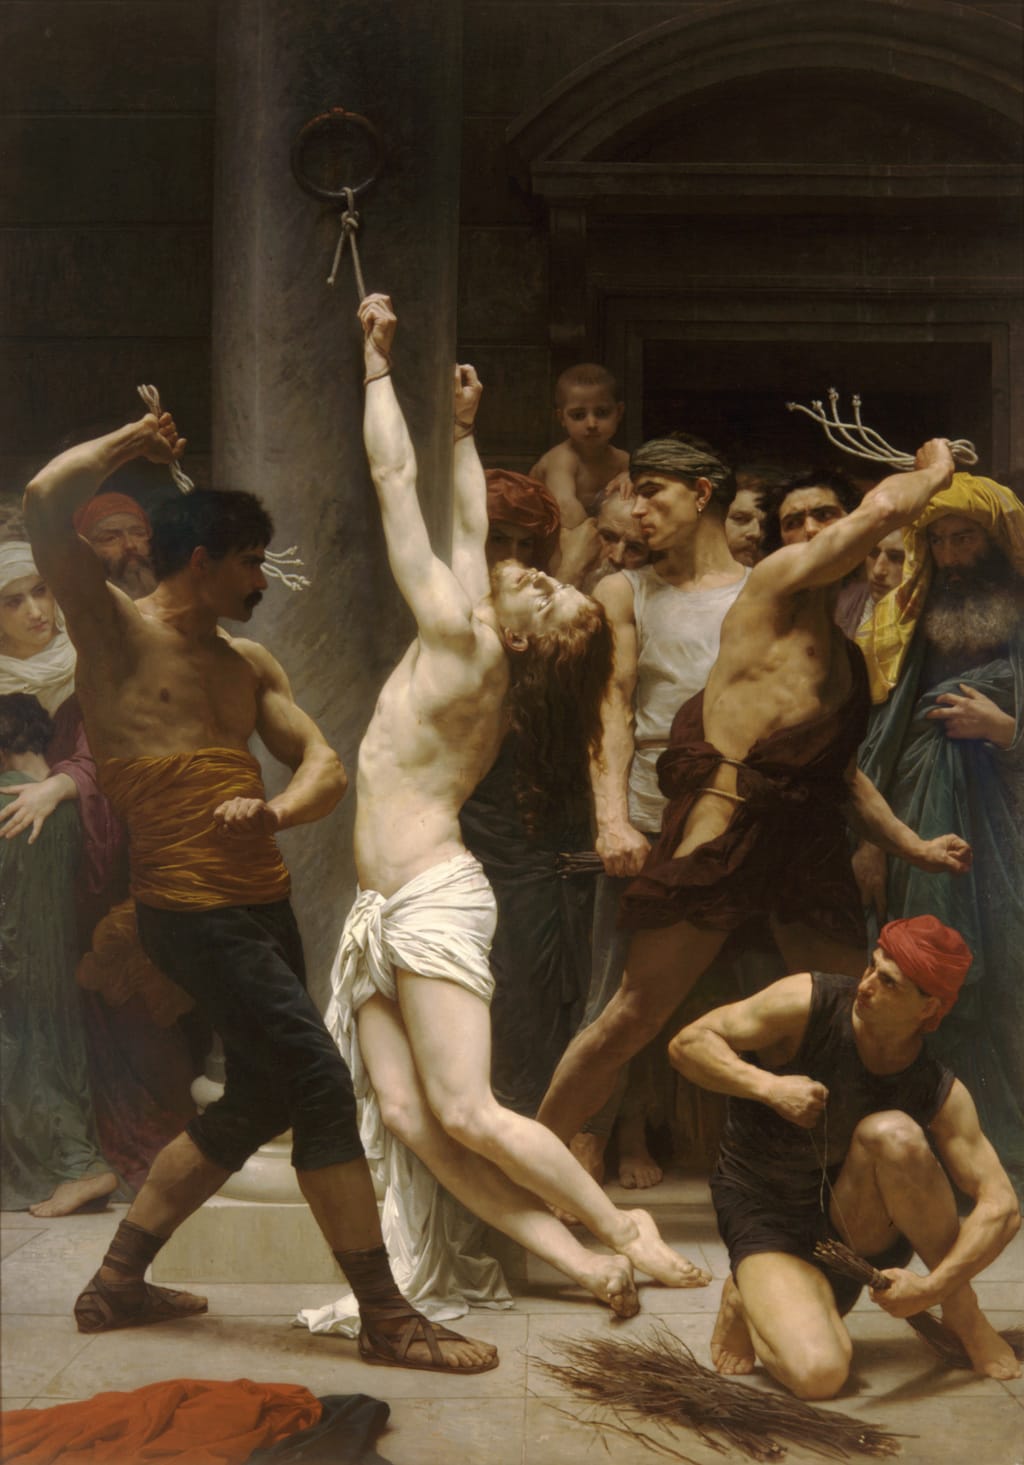 William Adolphe Bouguereau - The Flagellation of Our Lord Jesus Christ